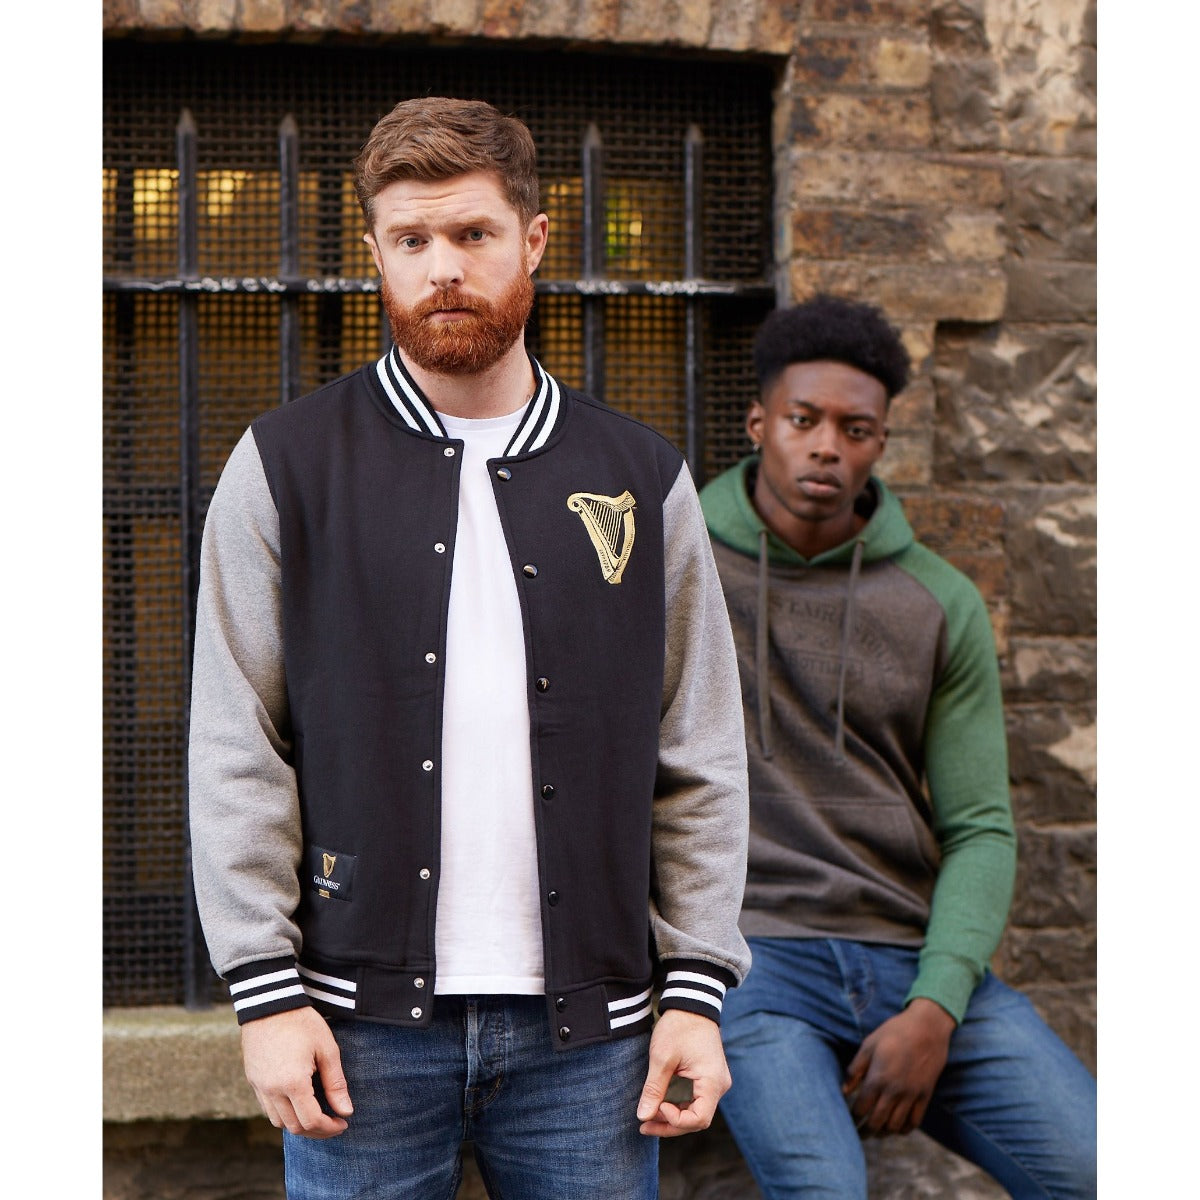 A man and a woman wearing Guinness varsity jackets standing next to a brick wall.